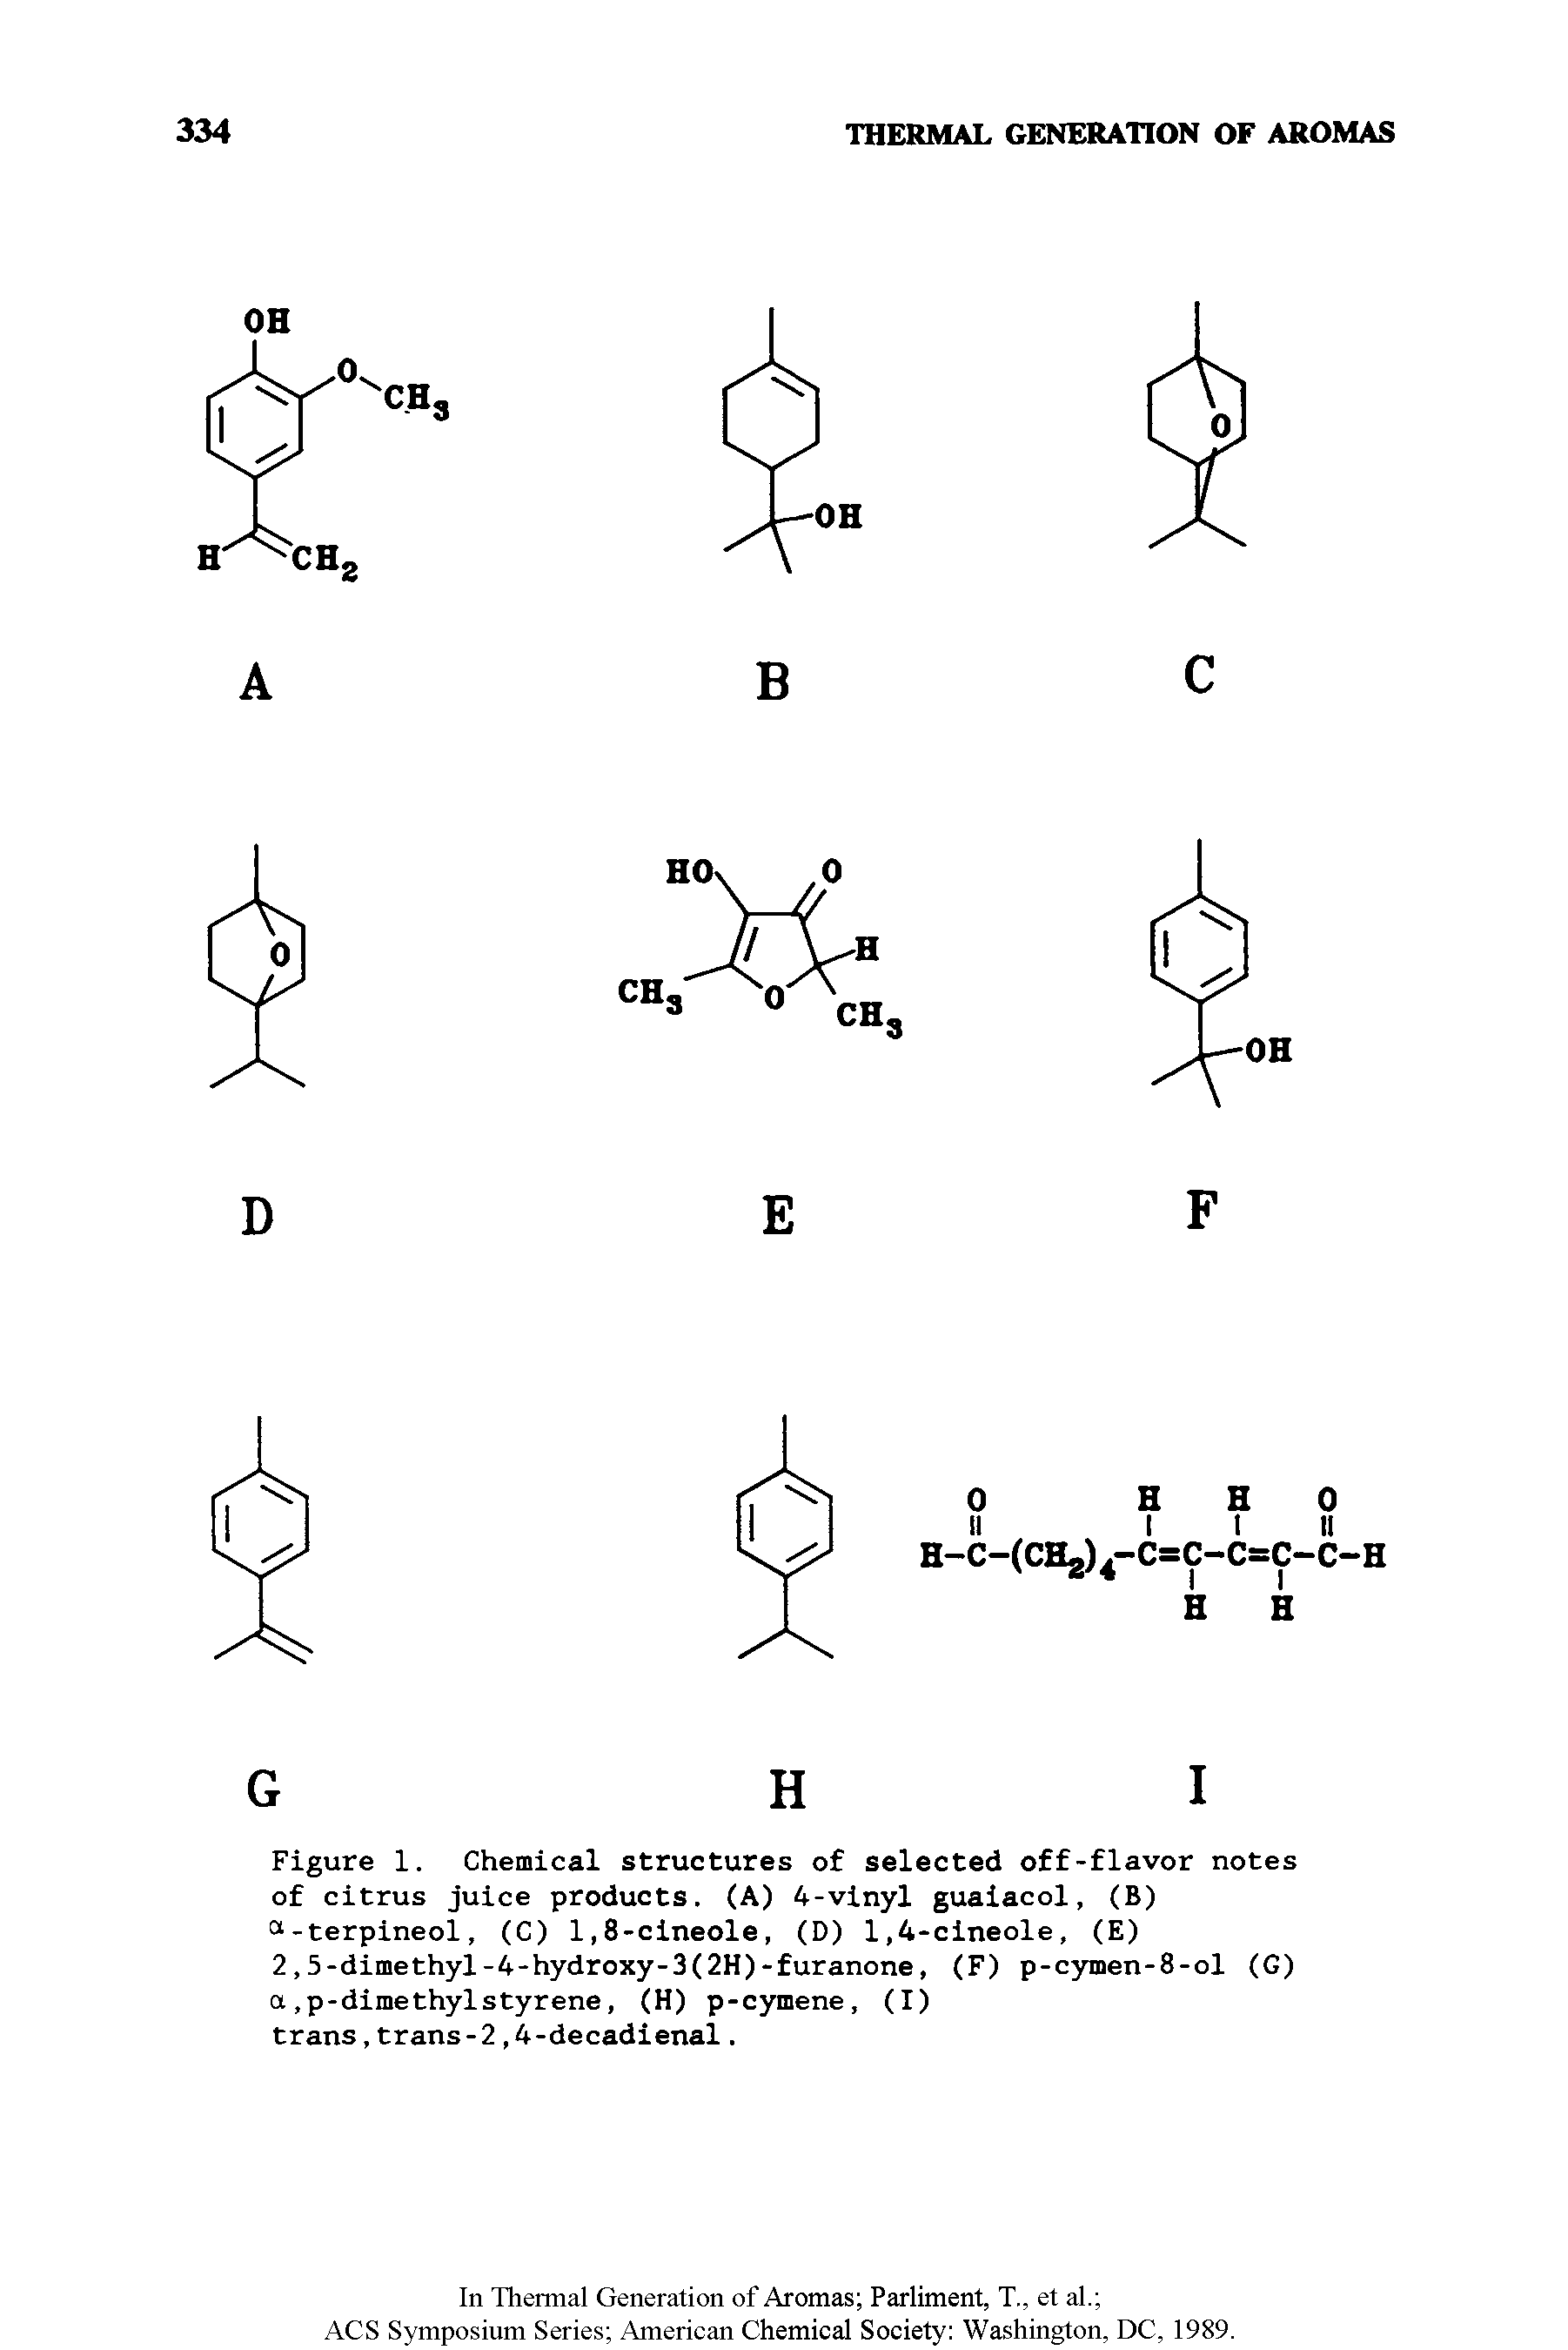 Figure 1. Chemical structures of selected off-flavor notes of citrus juice products. (A) 4-vinyl guaiacol, (B) a-terpineol, (C) 1,8-cineole, (D) 1,4-cineole, (E)...